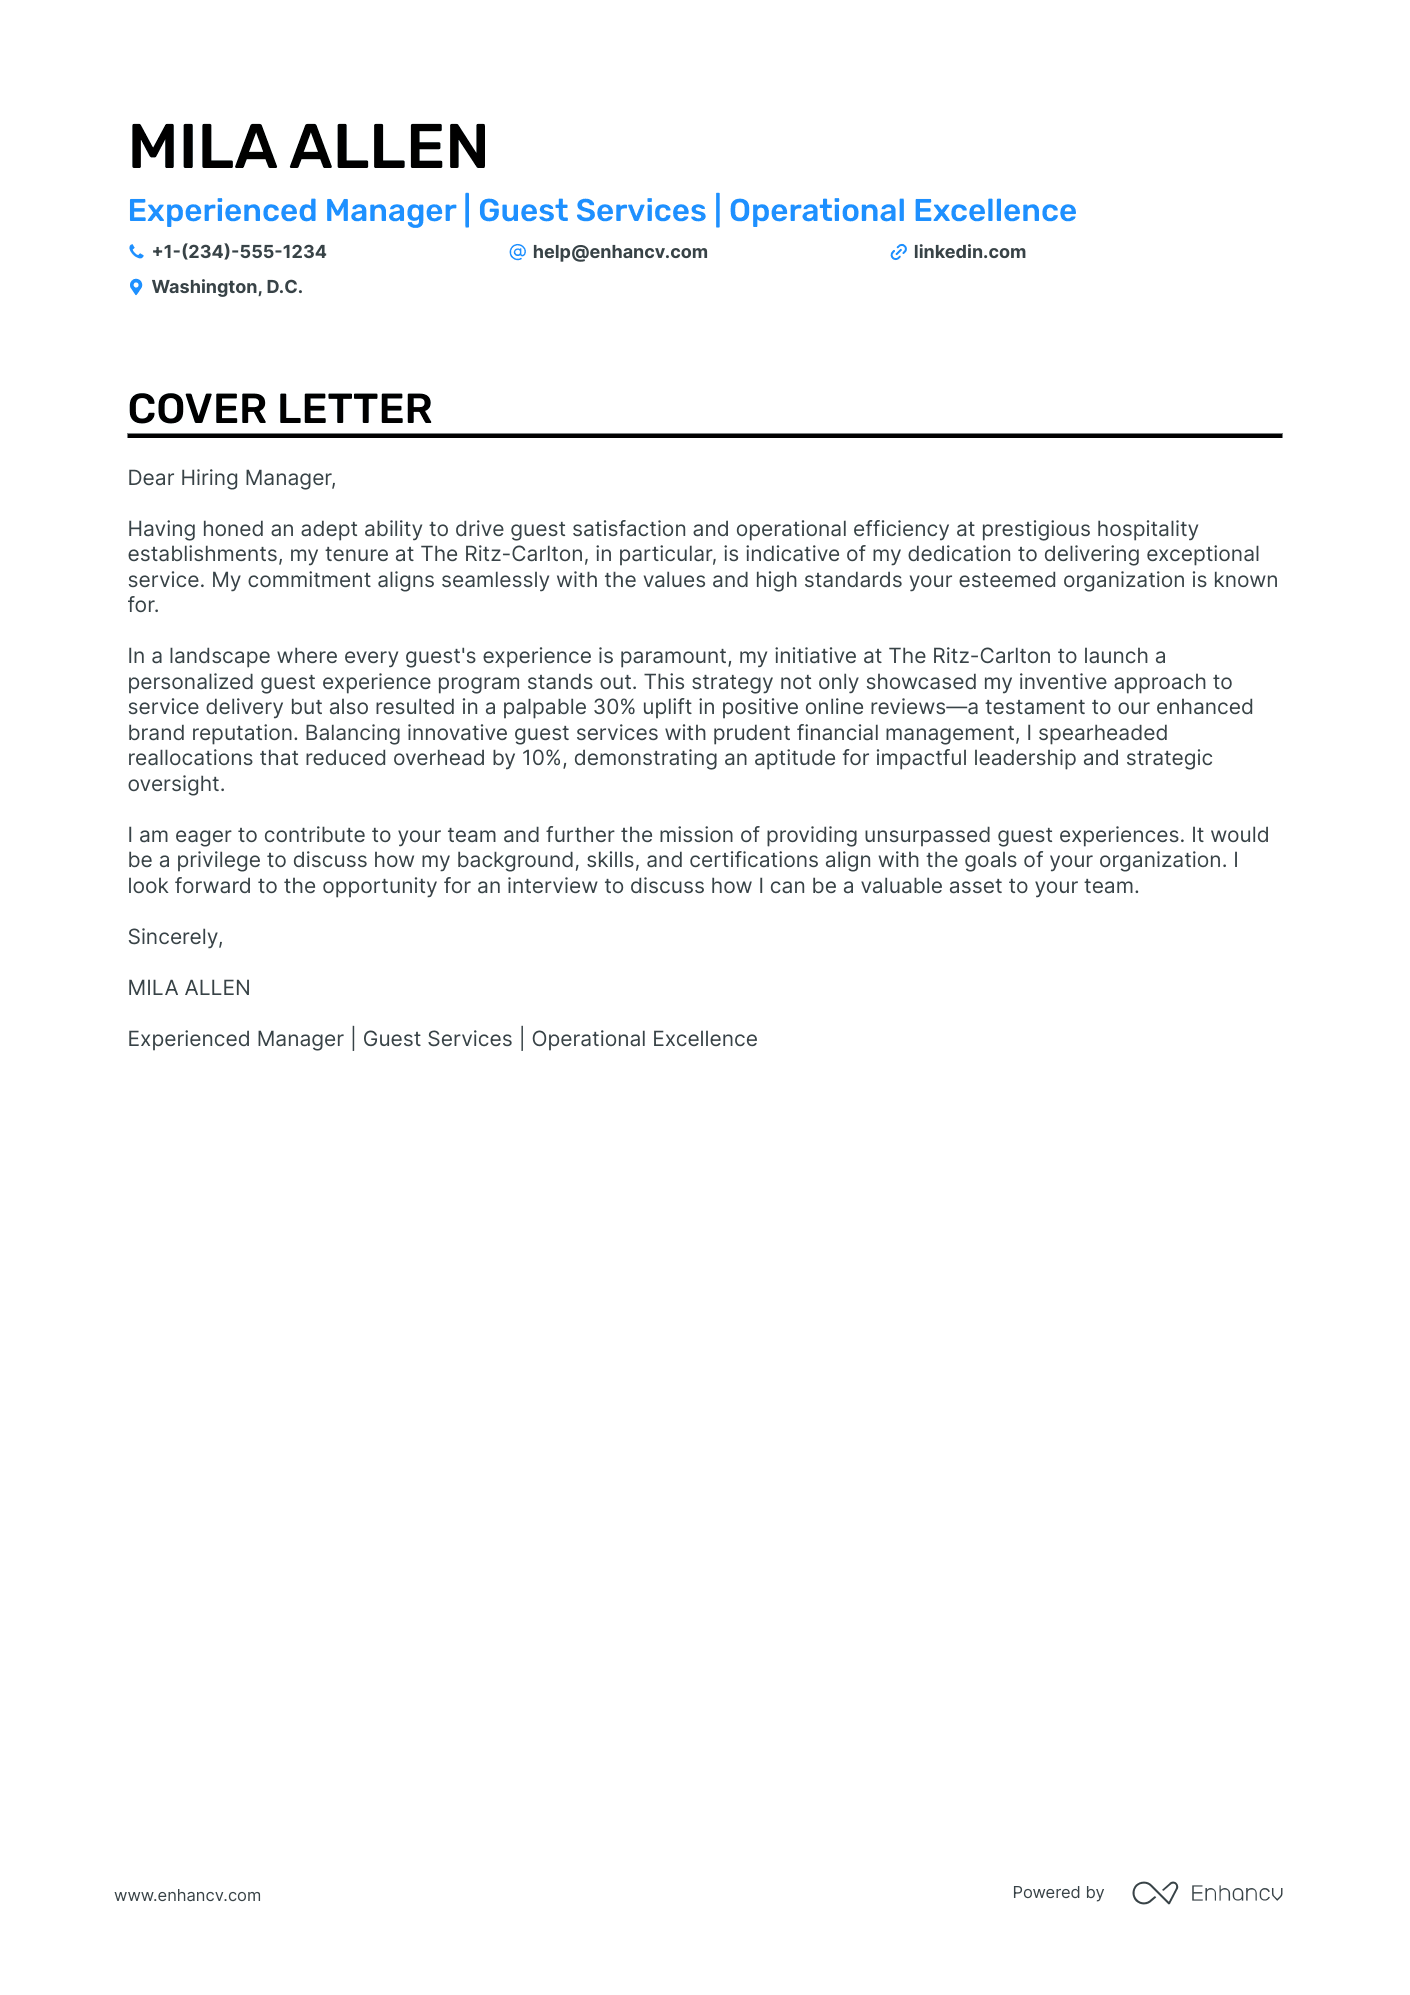 cover letter examples for hotel management